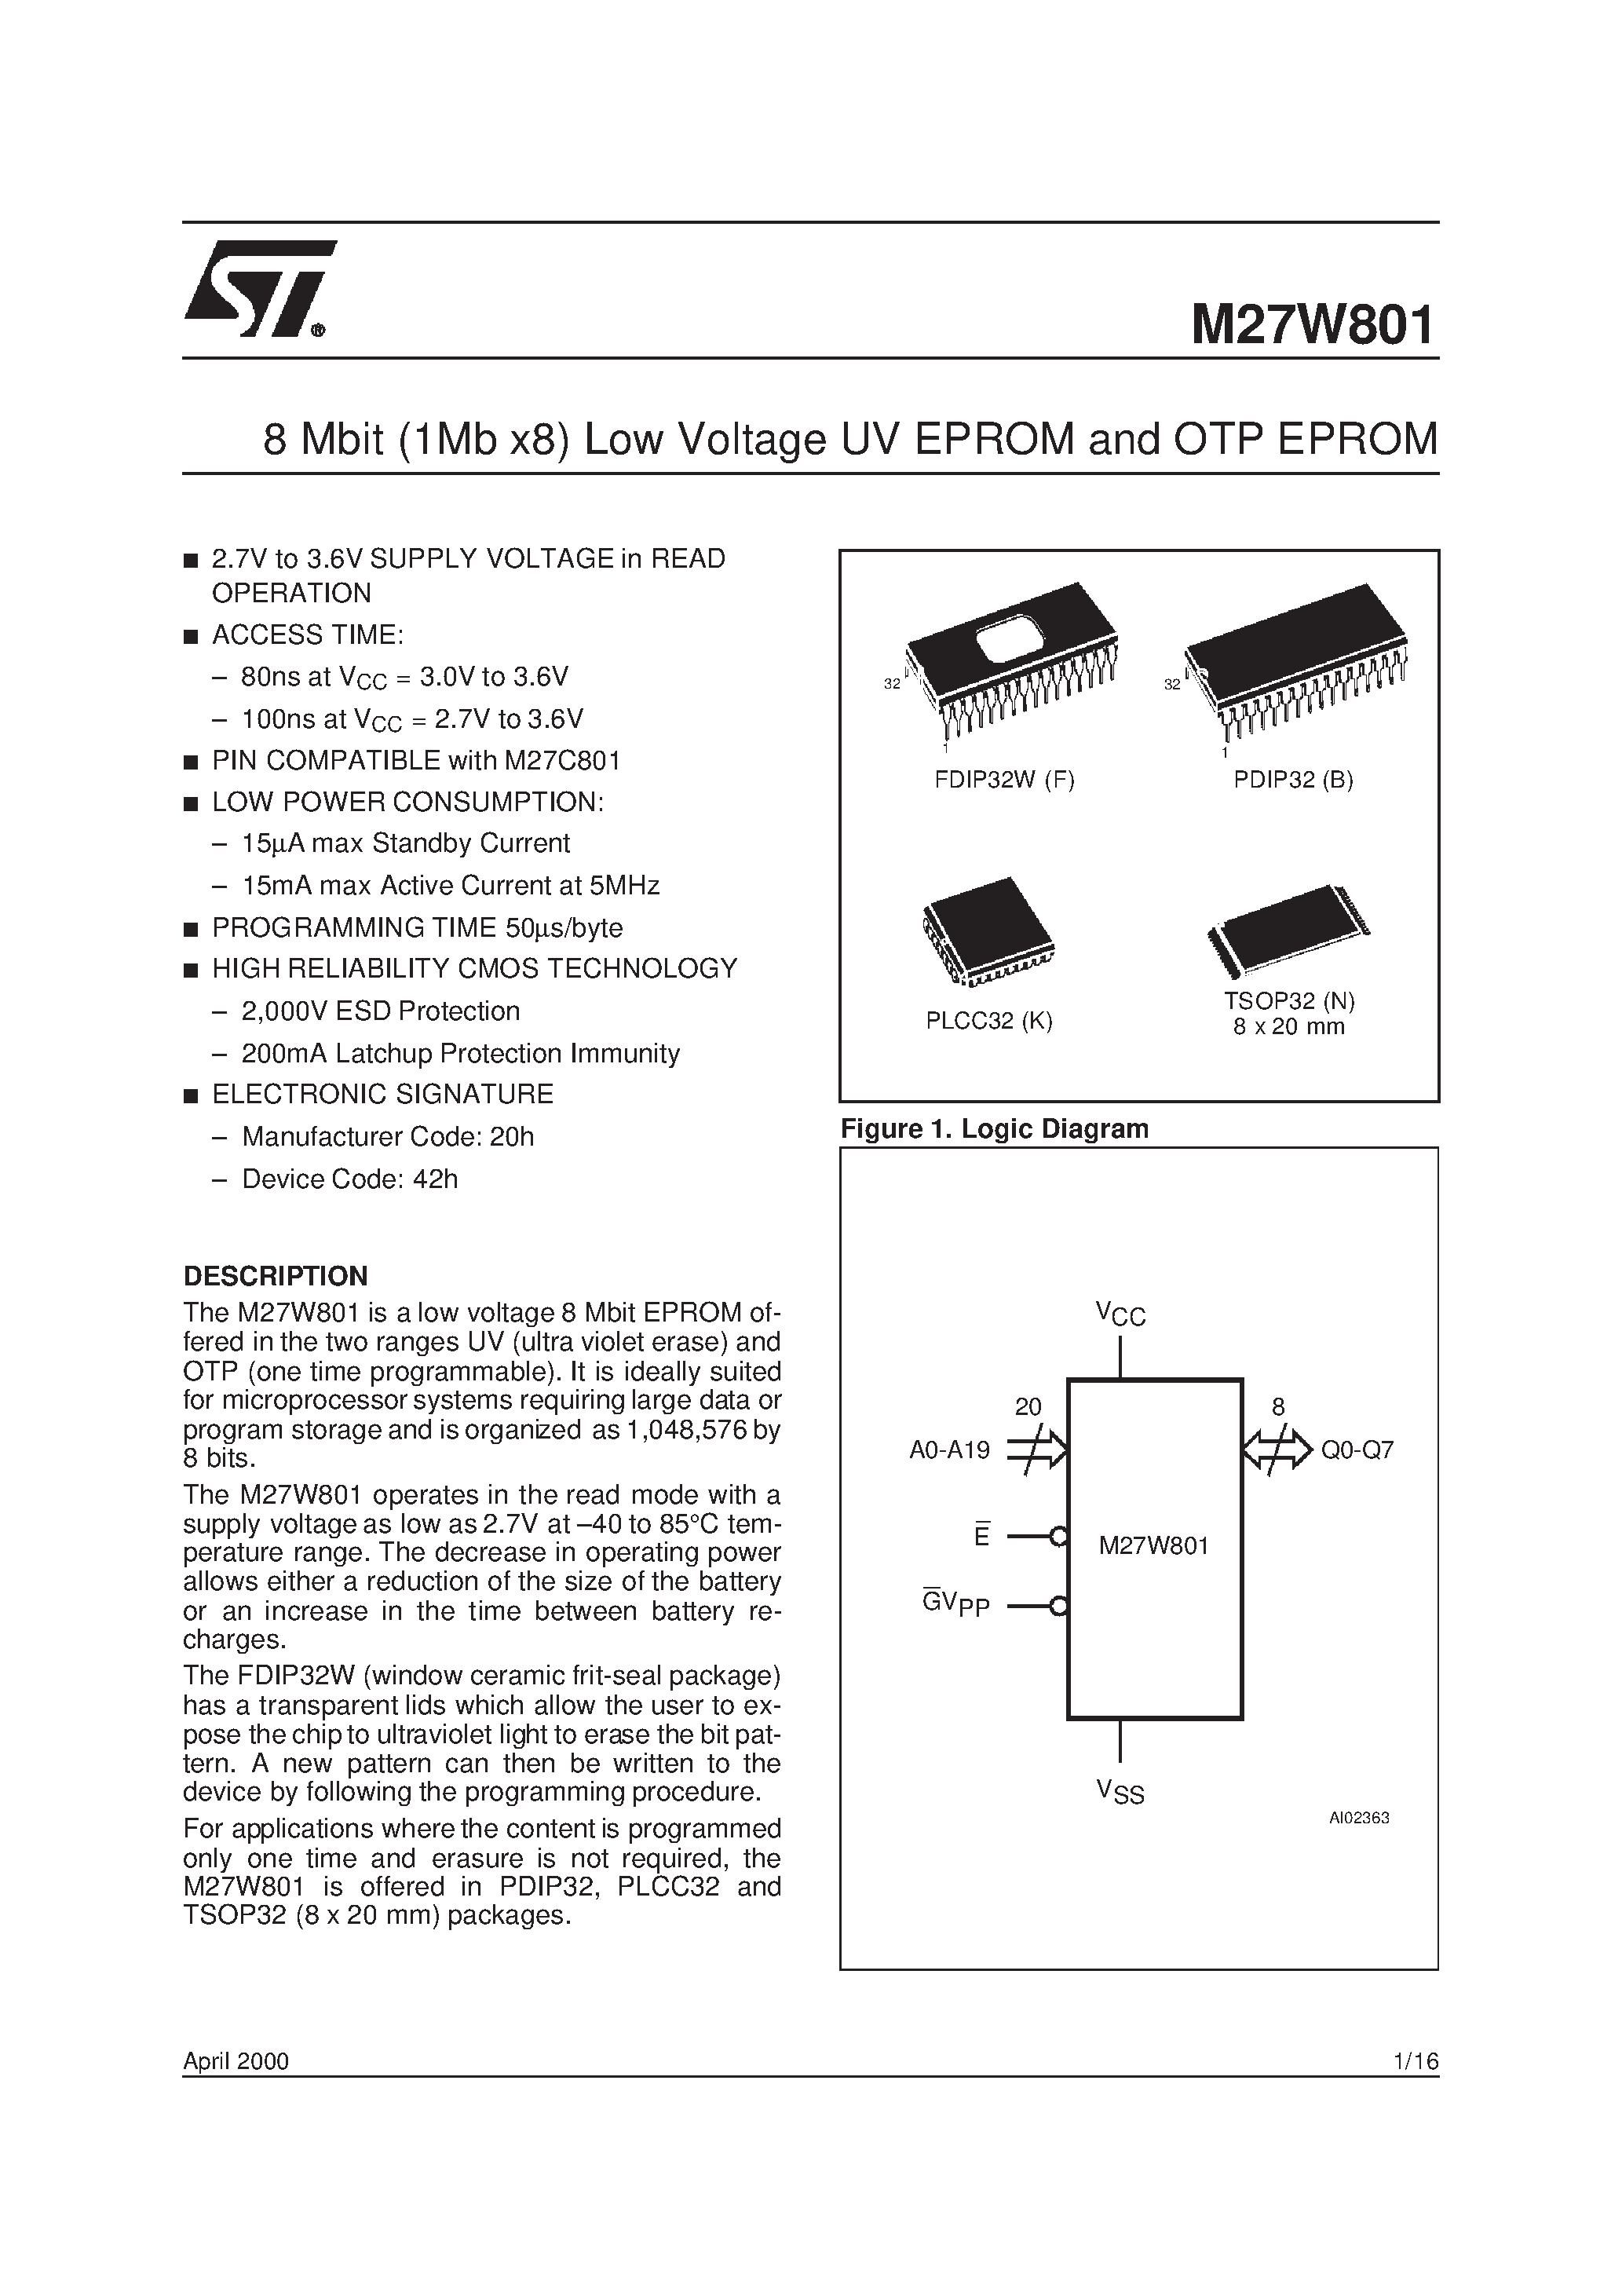 Datasheet M27W801-100B6TR - 8 Mbit 1Mb x8 Low Voltage UV EPROM and OTP EPROM page 1